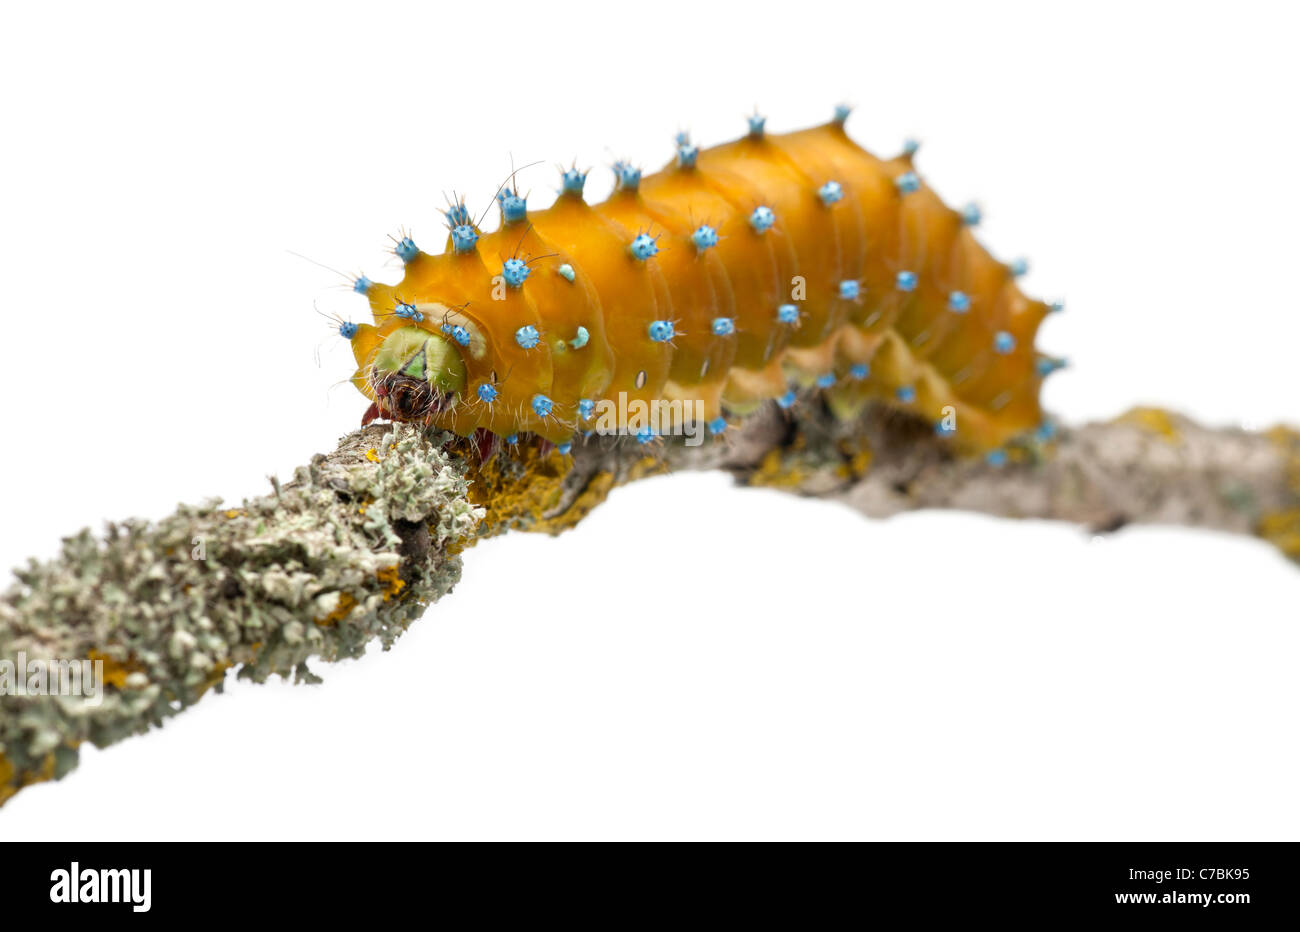 Caterpillar of the Giant Peacock Moth, Saturnia pyri, on branch in front of white background Stock Photo